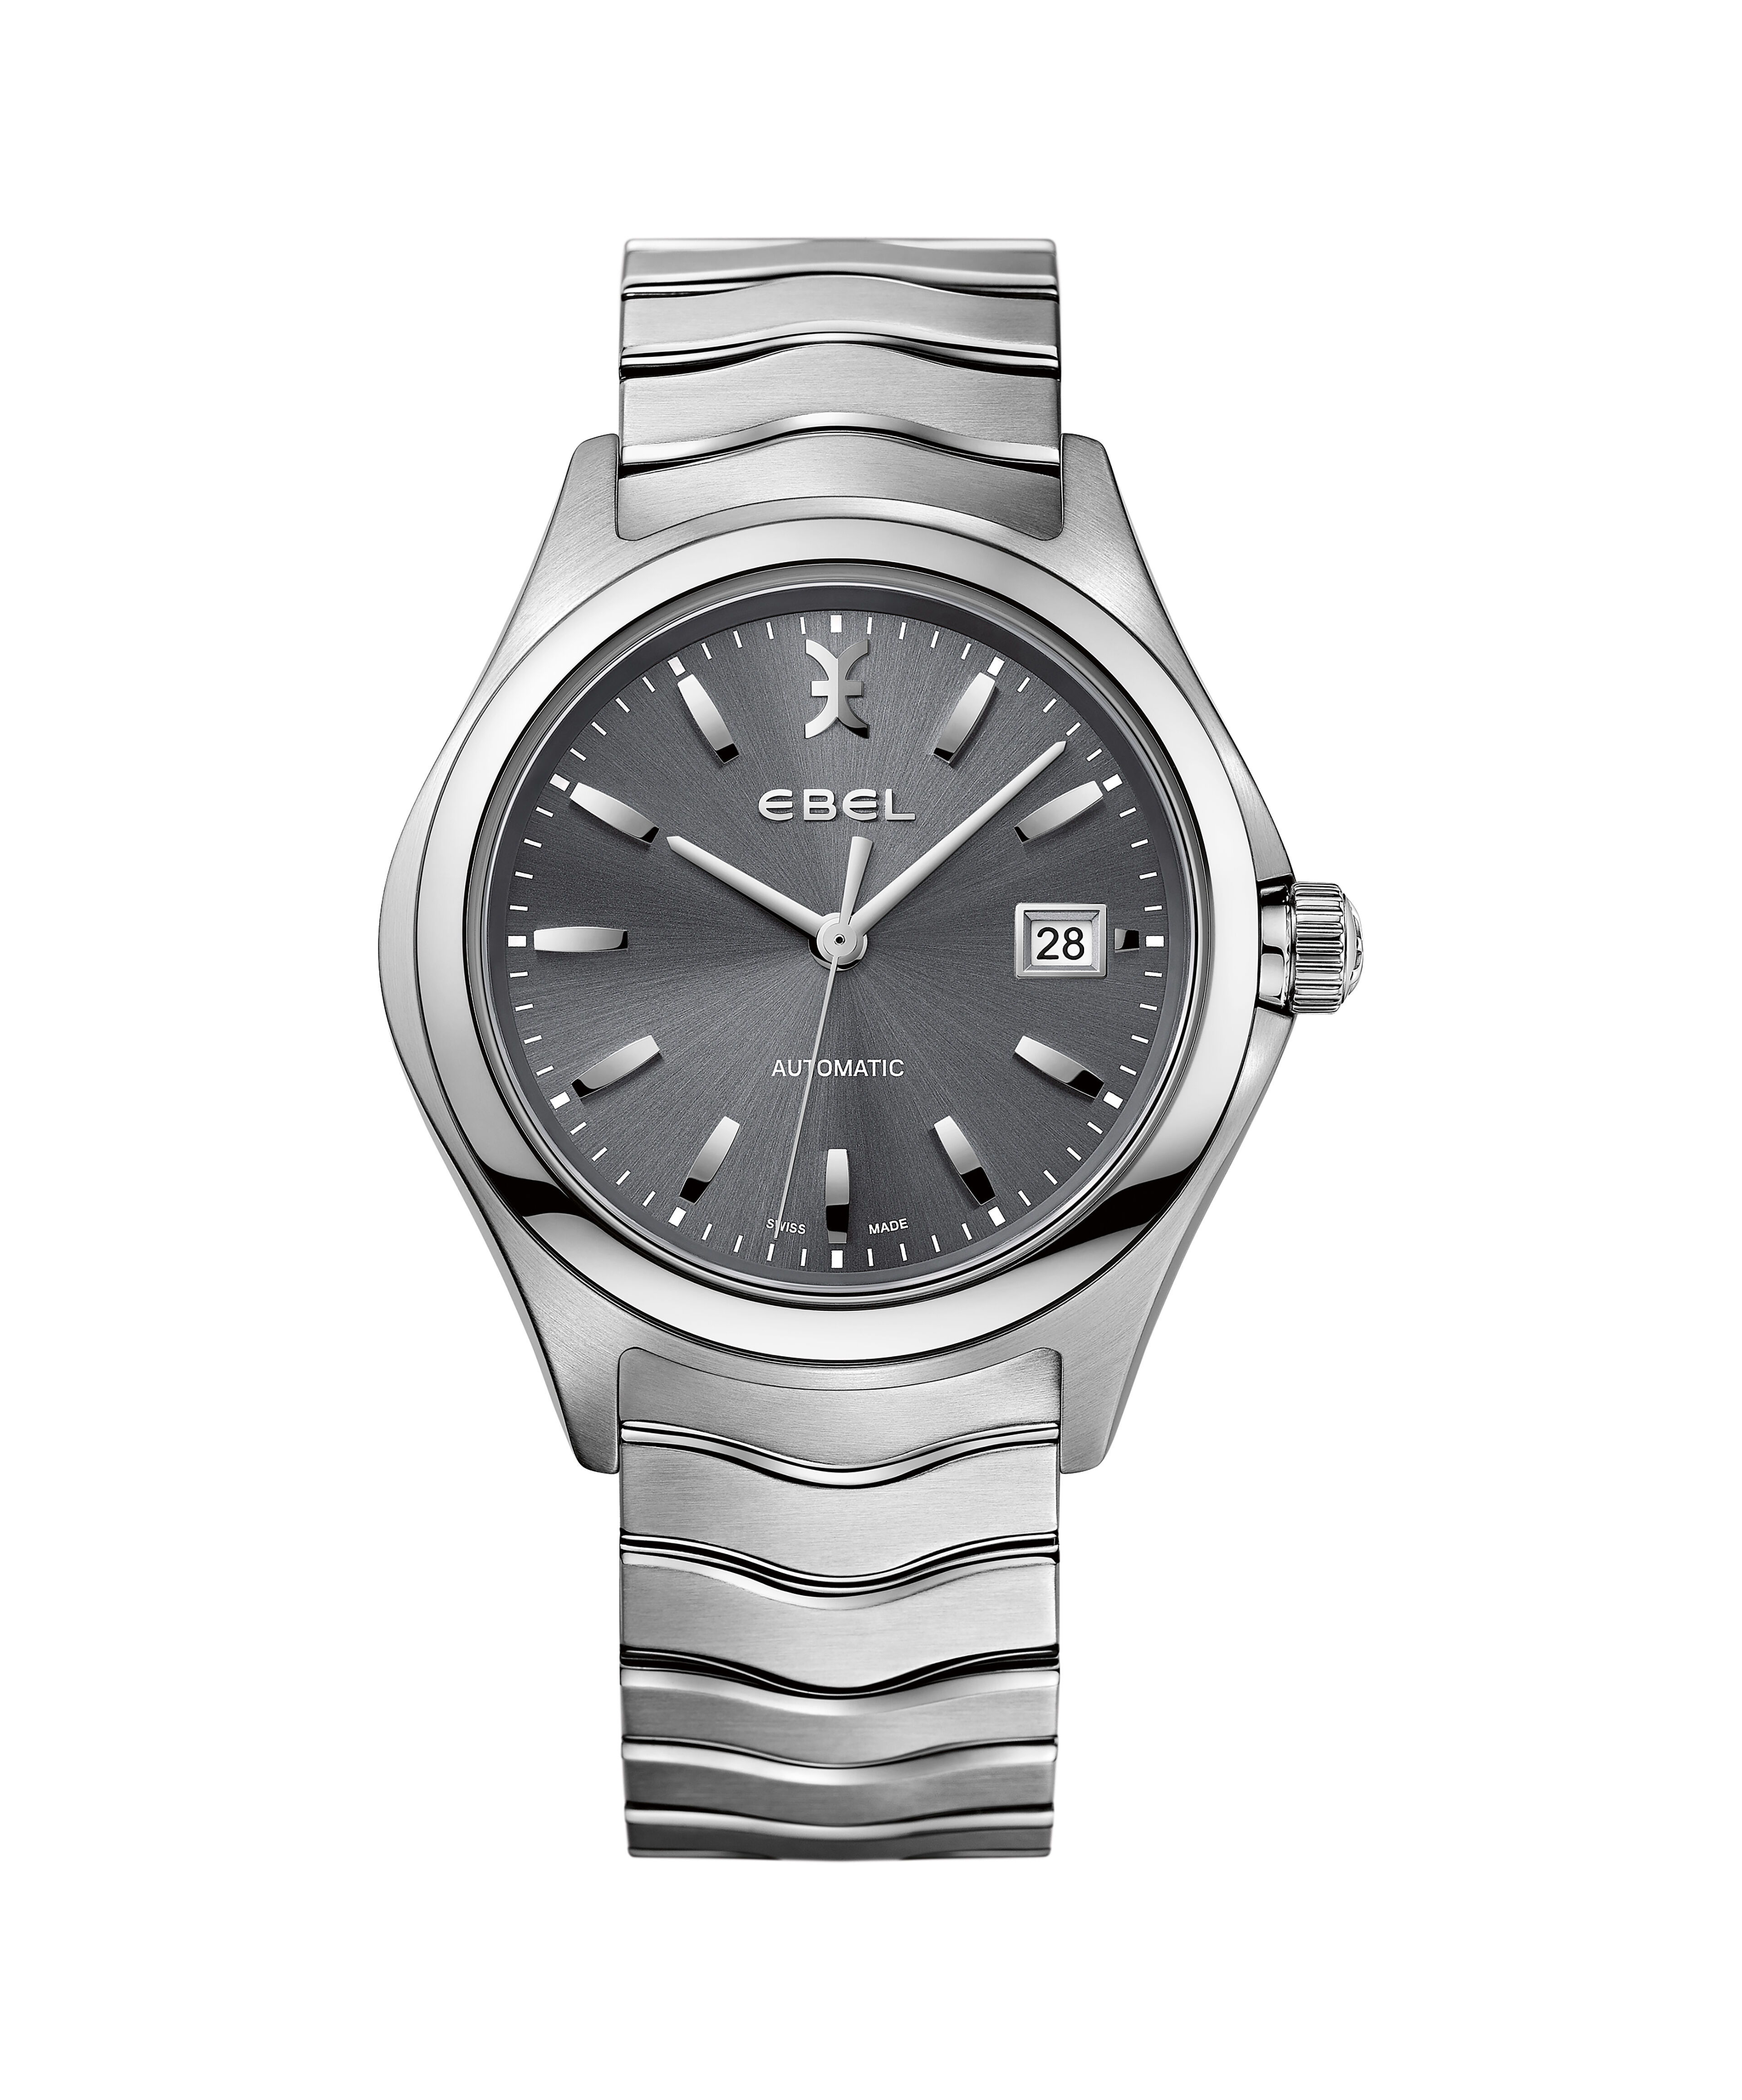 Tag Heuer Replica Watches Price